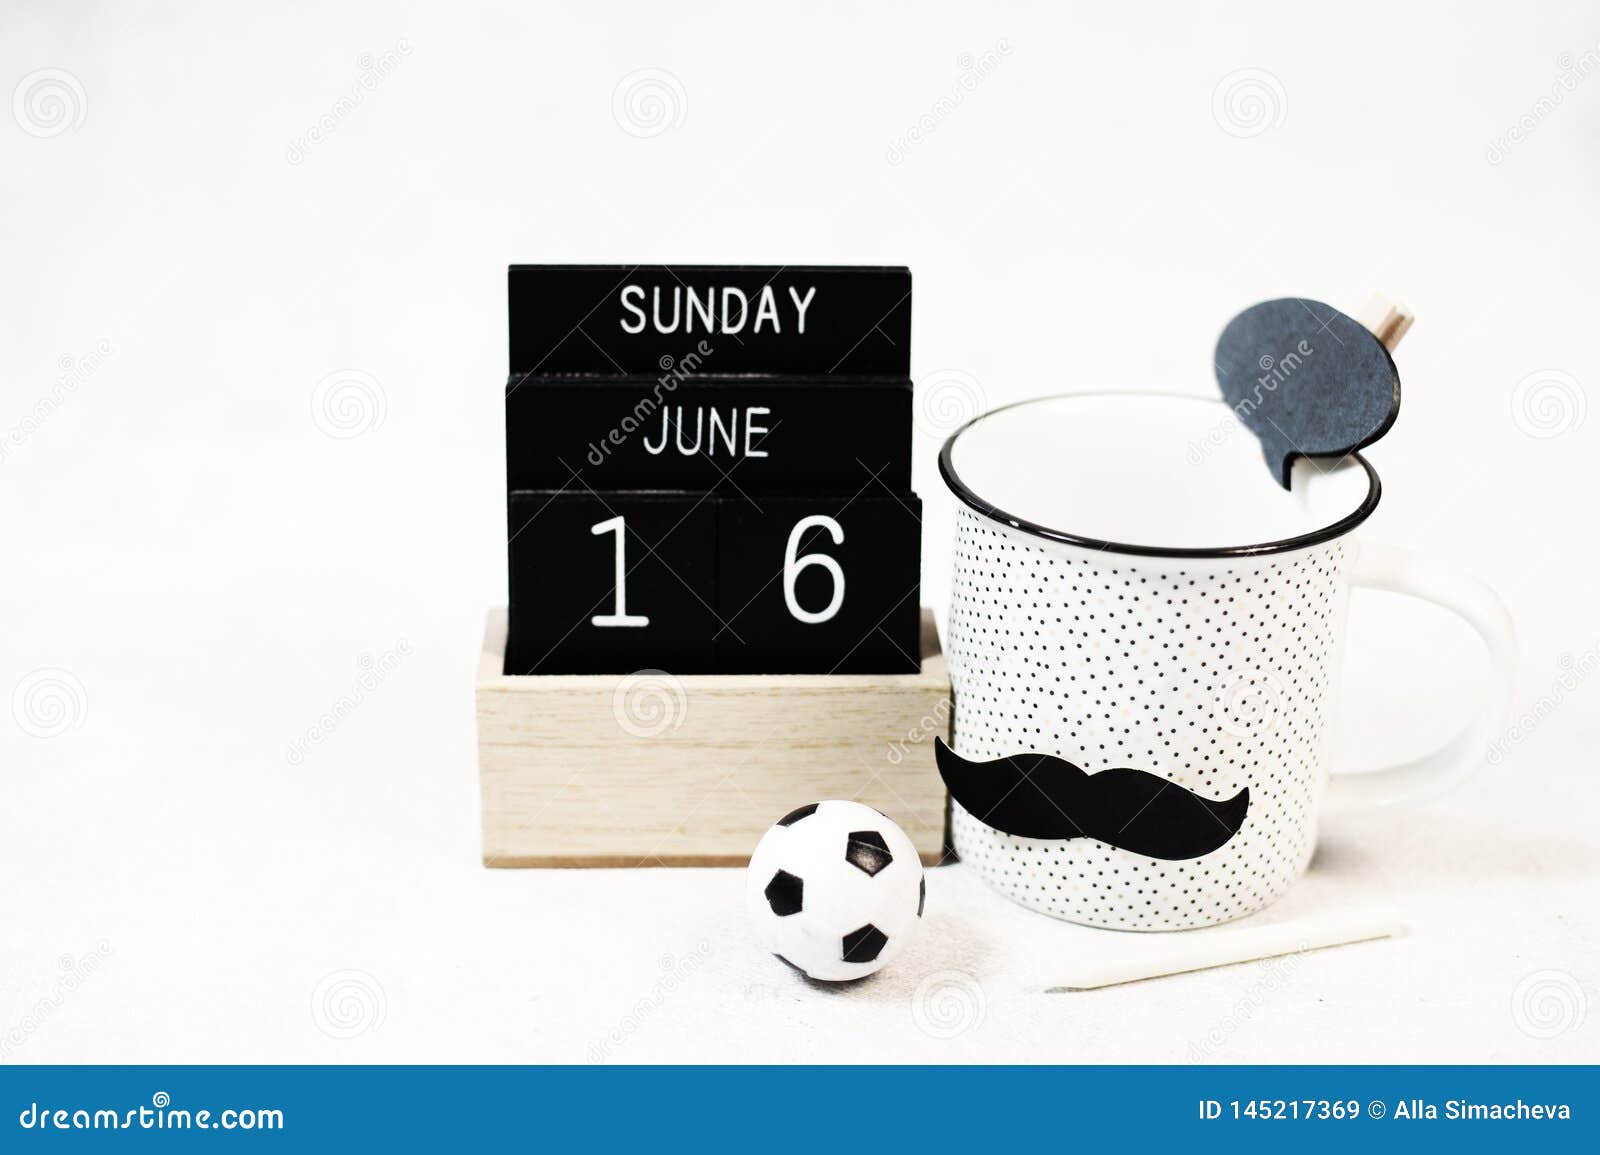 Father's Day Greeting Card Vintage Football 